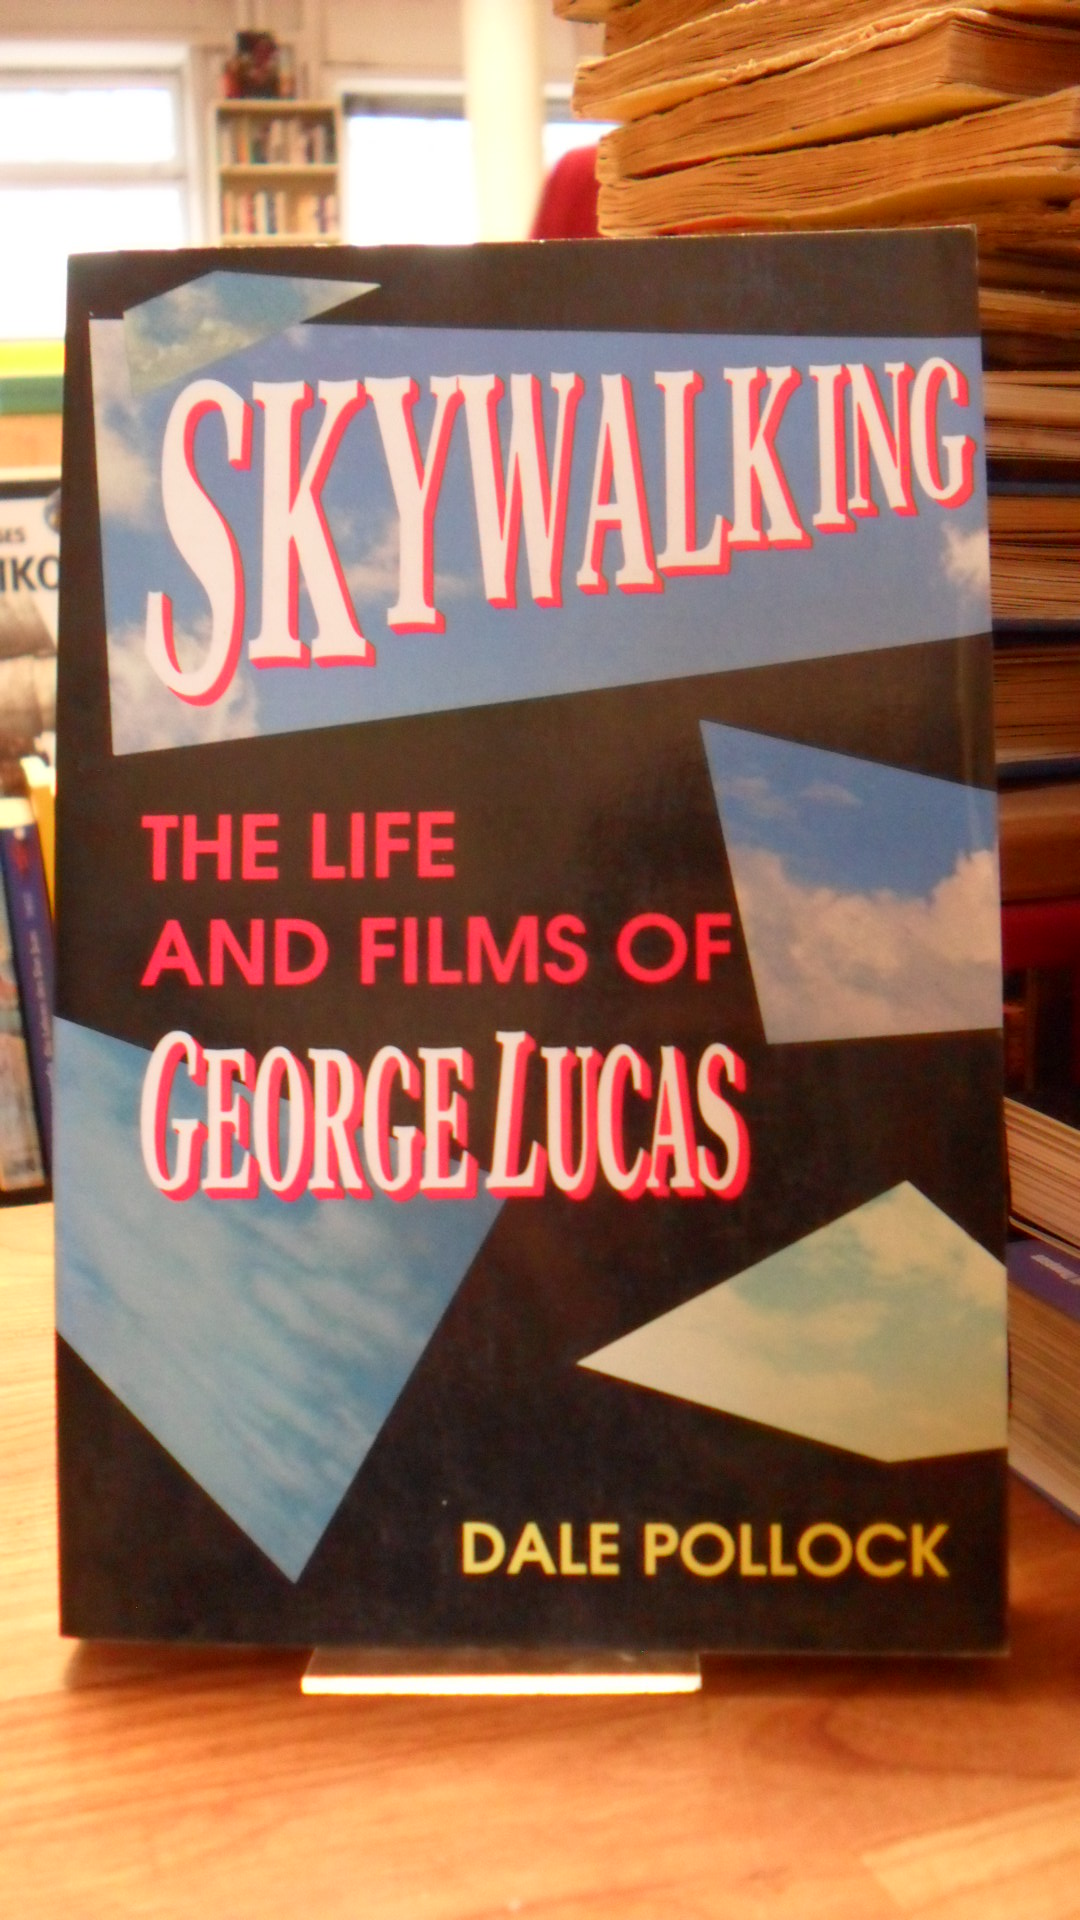 Pollock, Skywalking – The Life and Films of George Lucas,